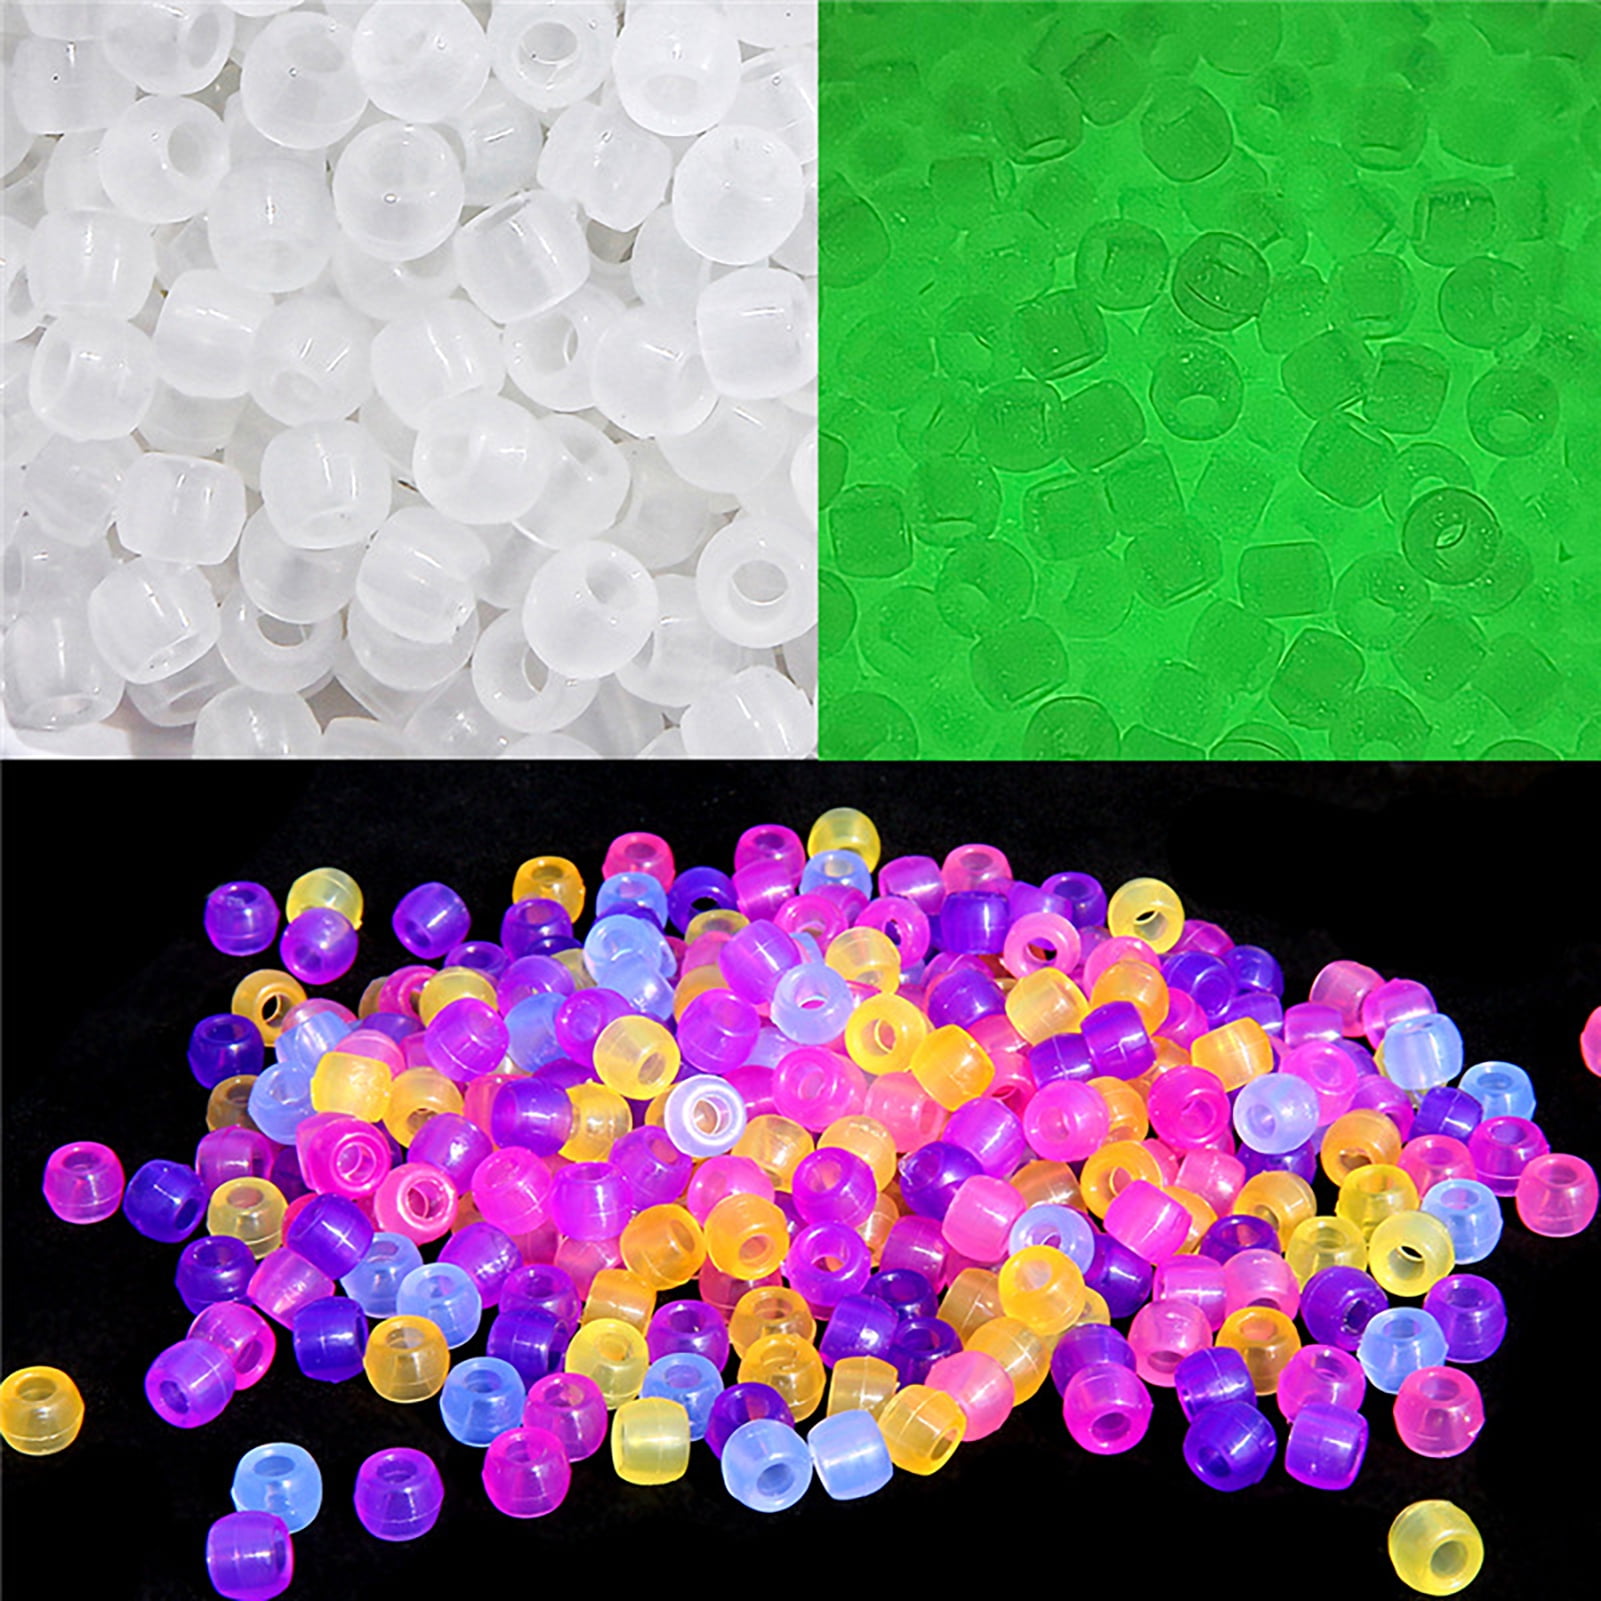 Aquabeads POLYGON BEAD PACK Refill Pack (Over 1150 Beads!) - Just Add Water!